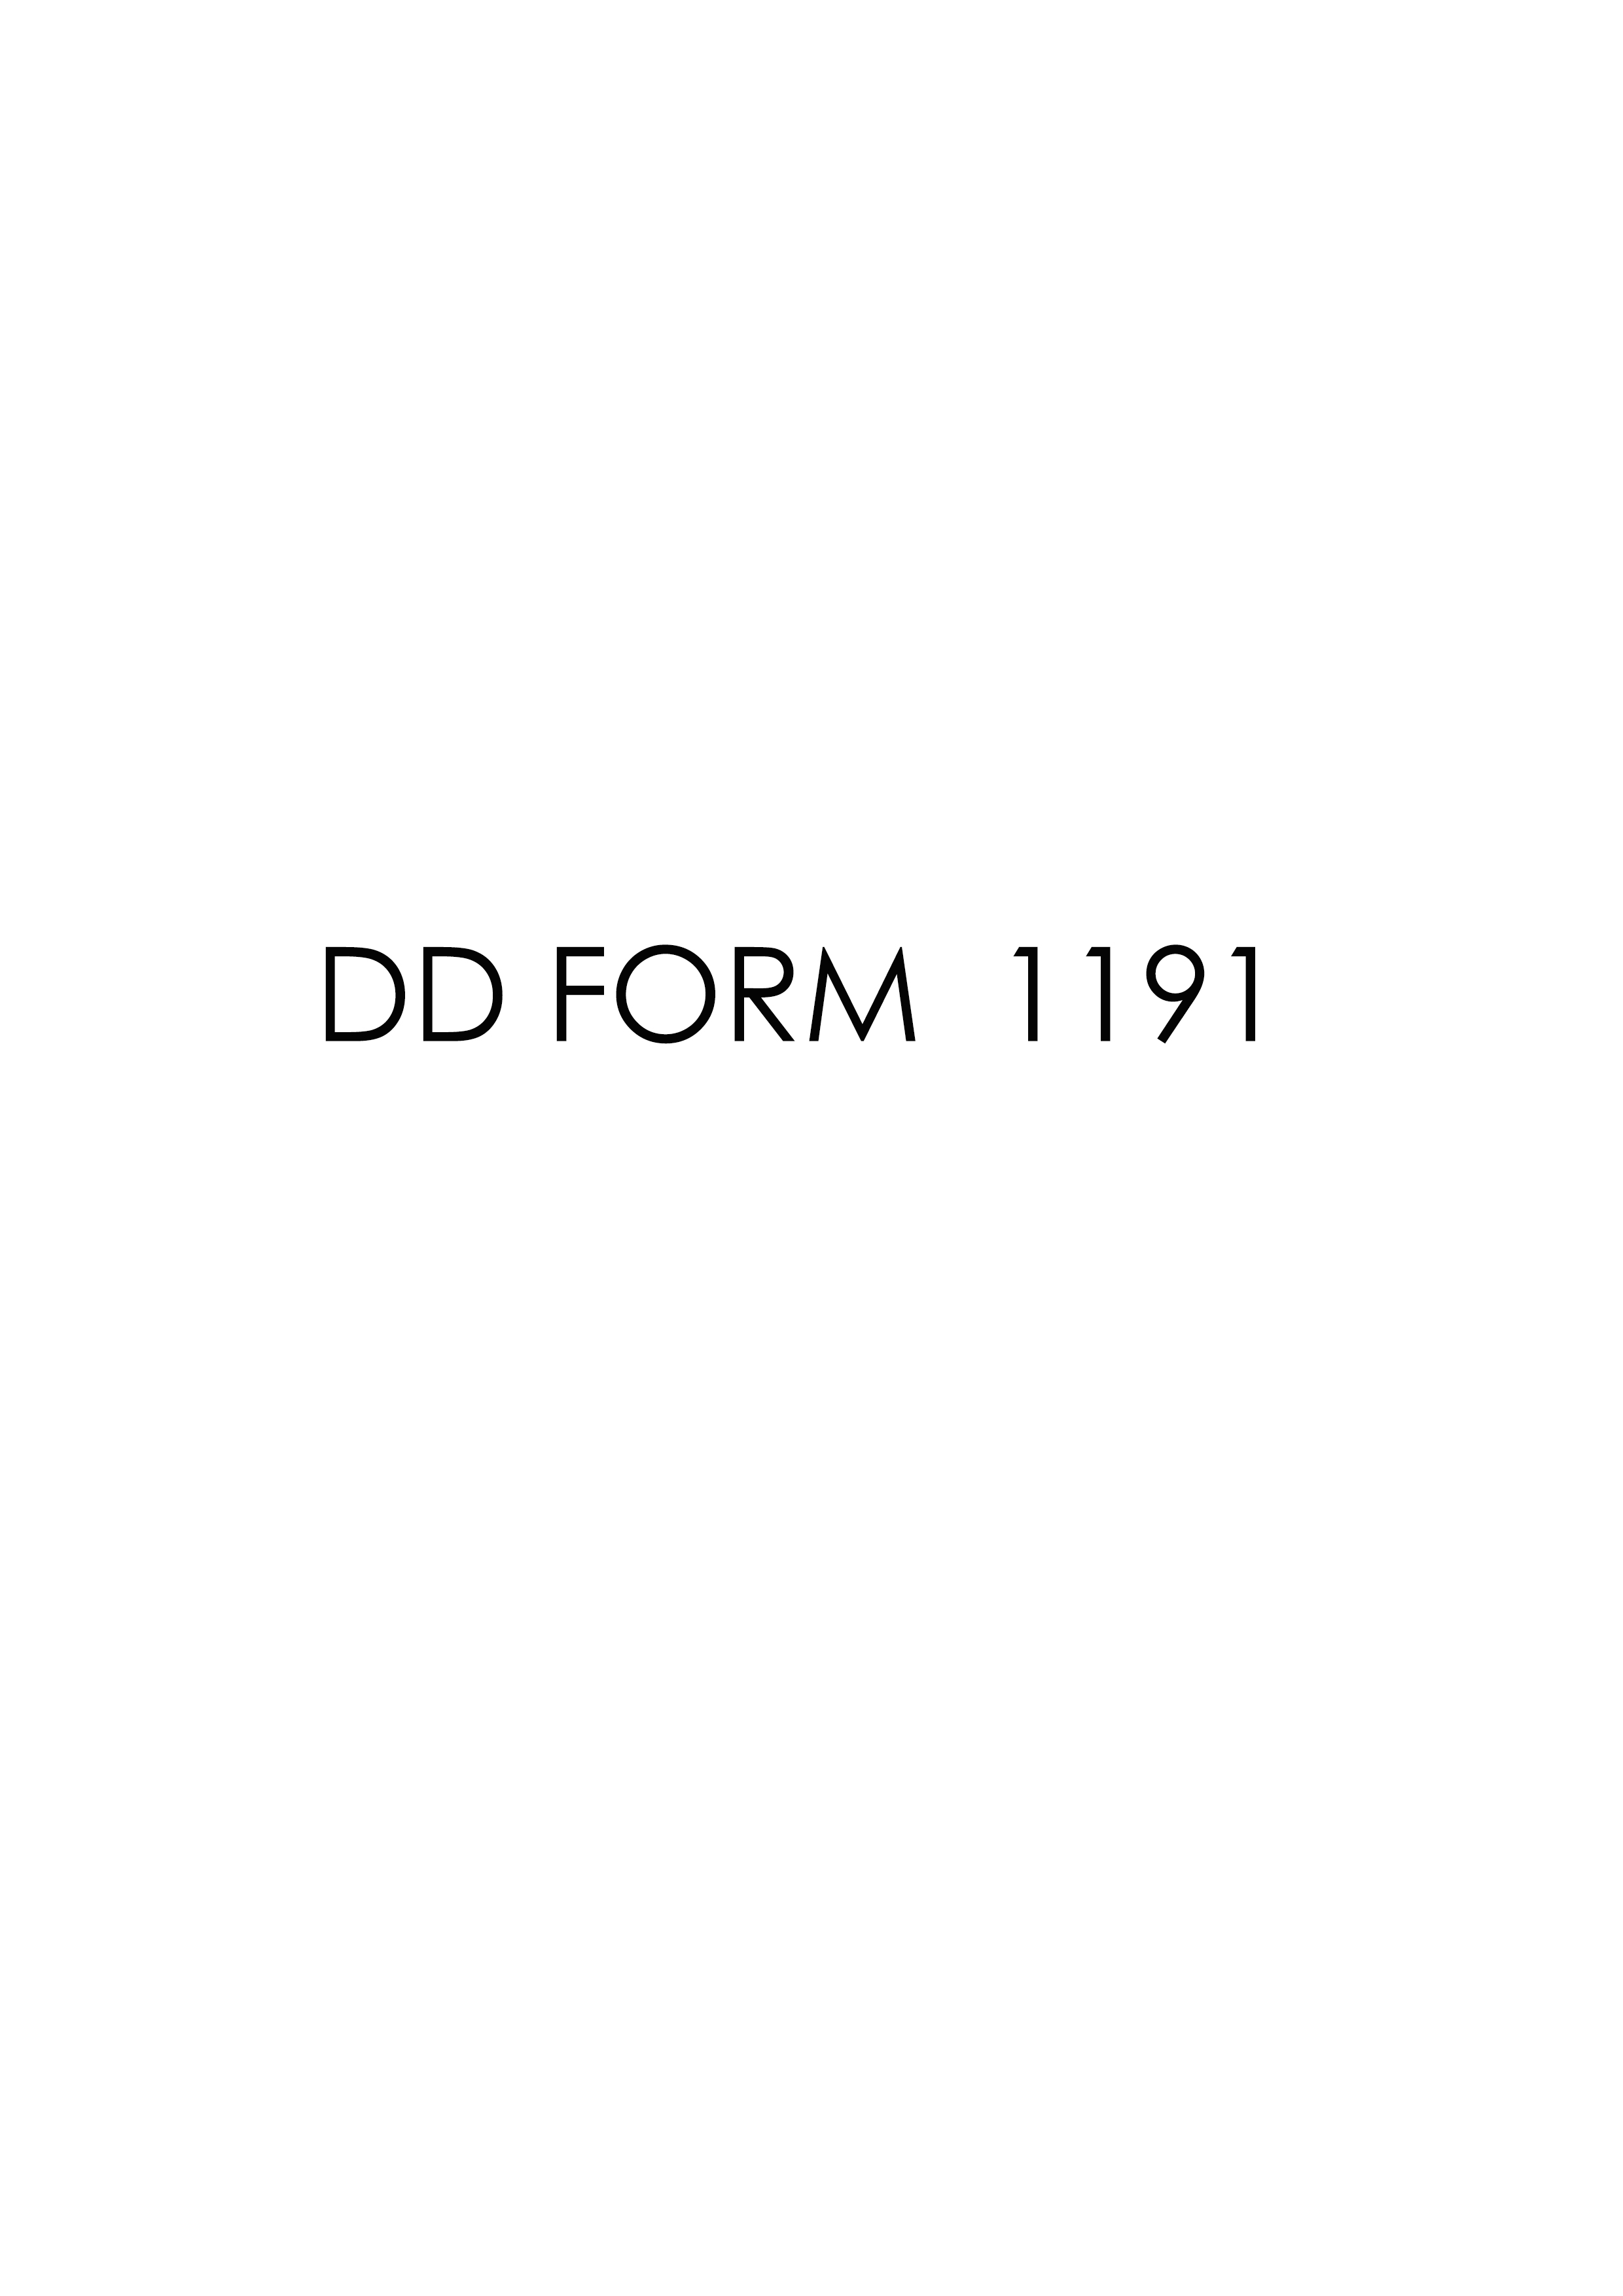 Download Fillable dd Form 1191